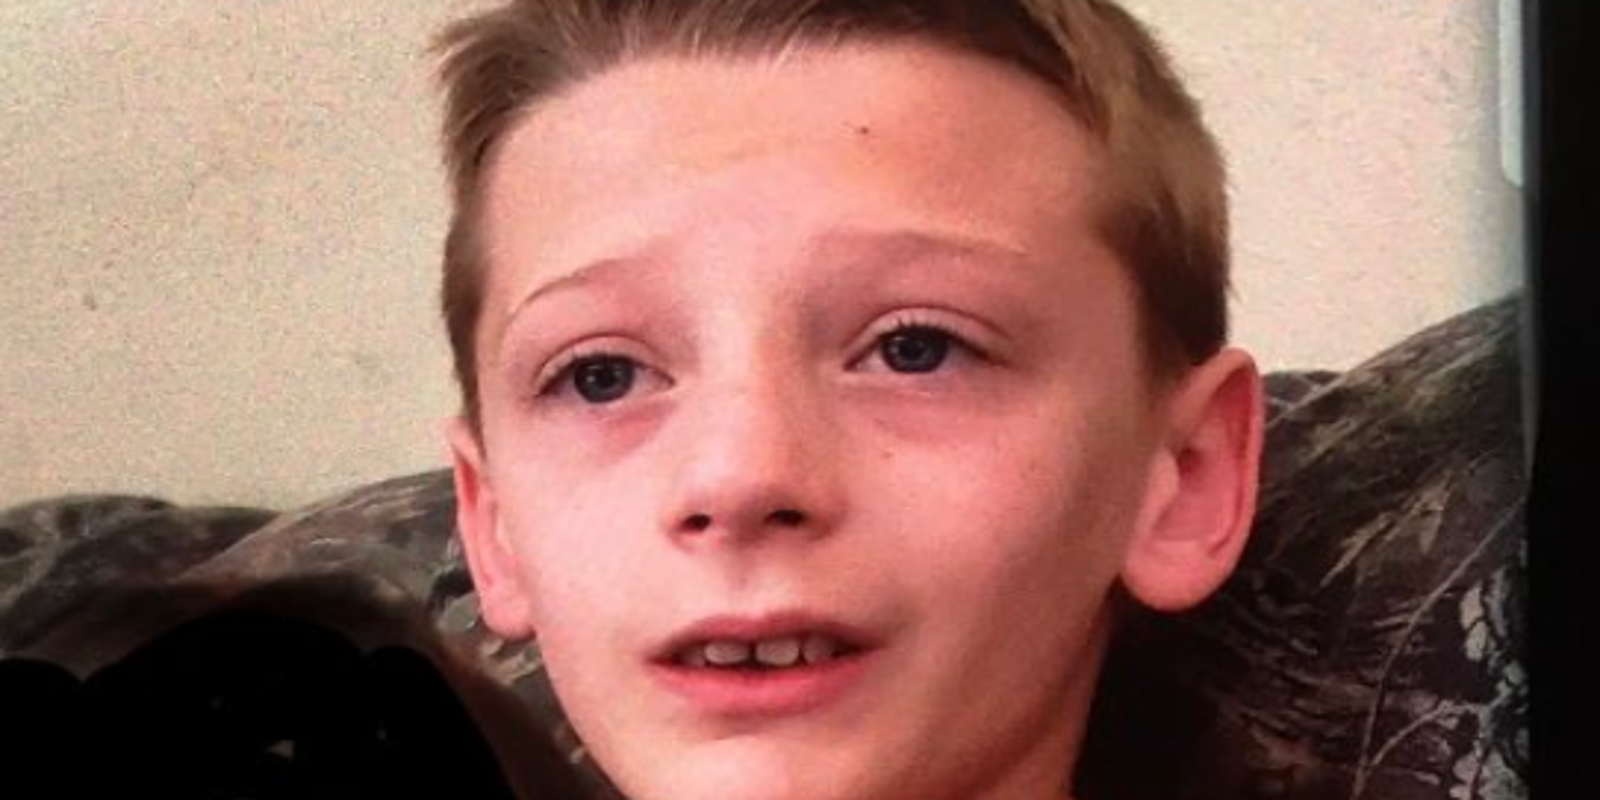 Update Missing 11 Year Old Boy Found Unharmed In Good Health